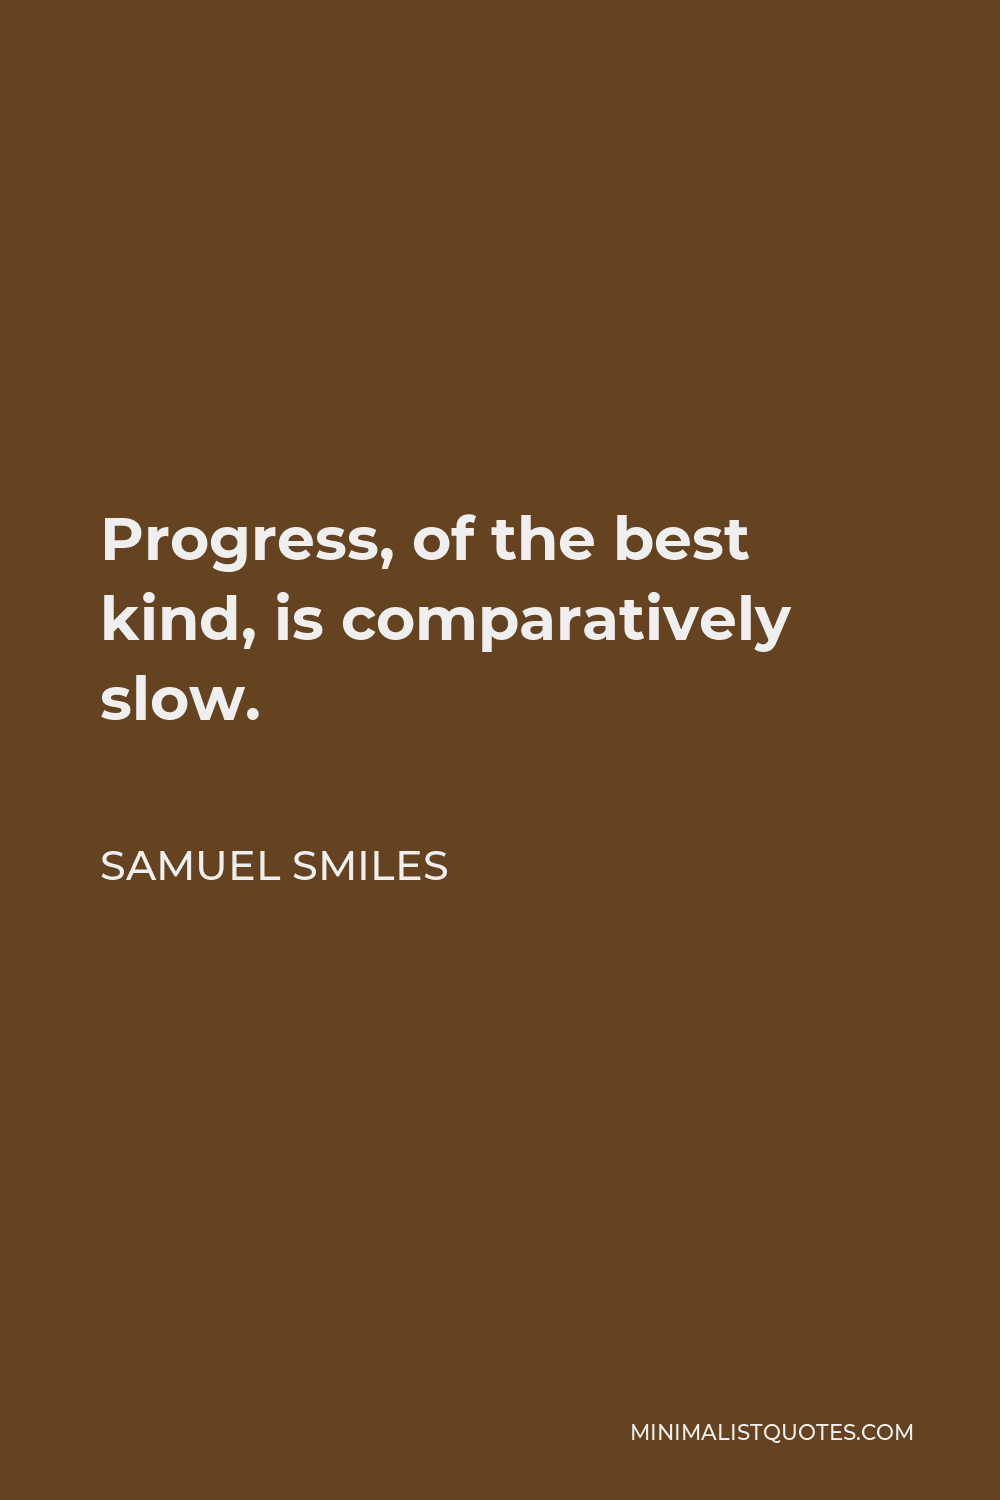 Samuel Smiles Quote - Progress, of the best kind, is comparatively slow.